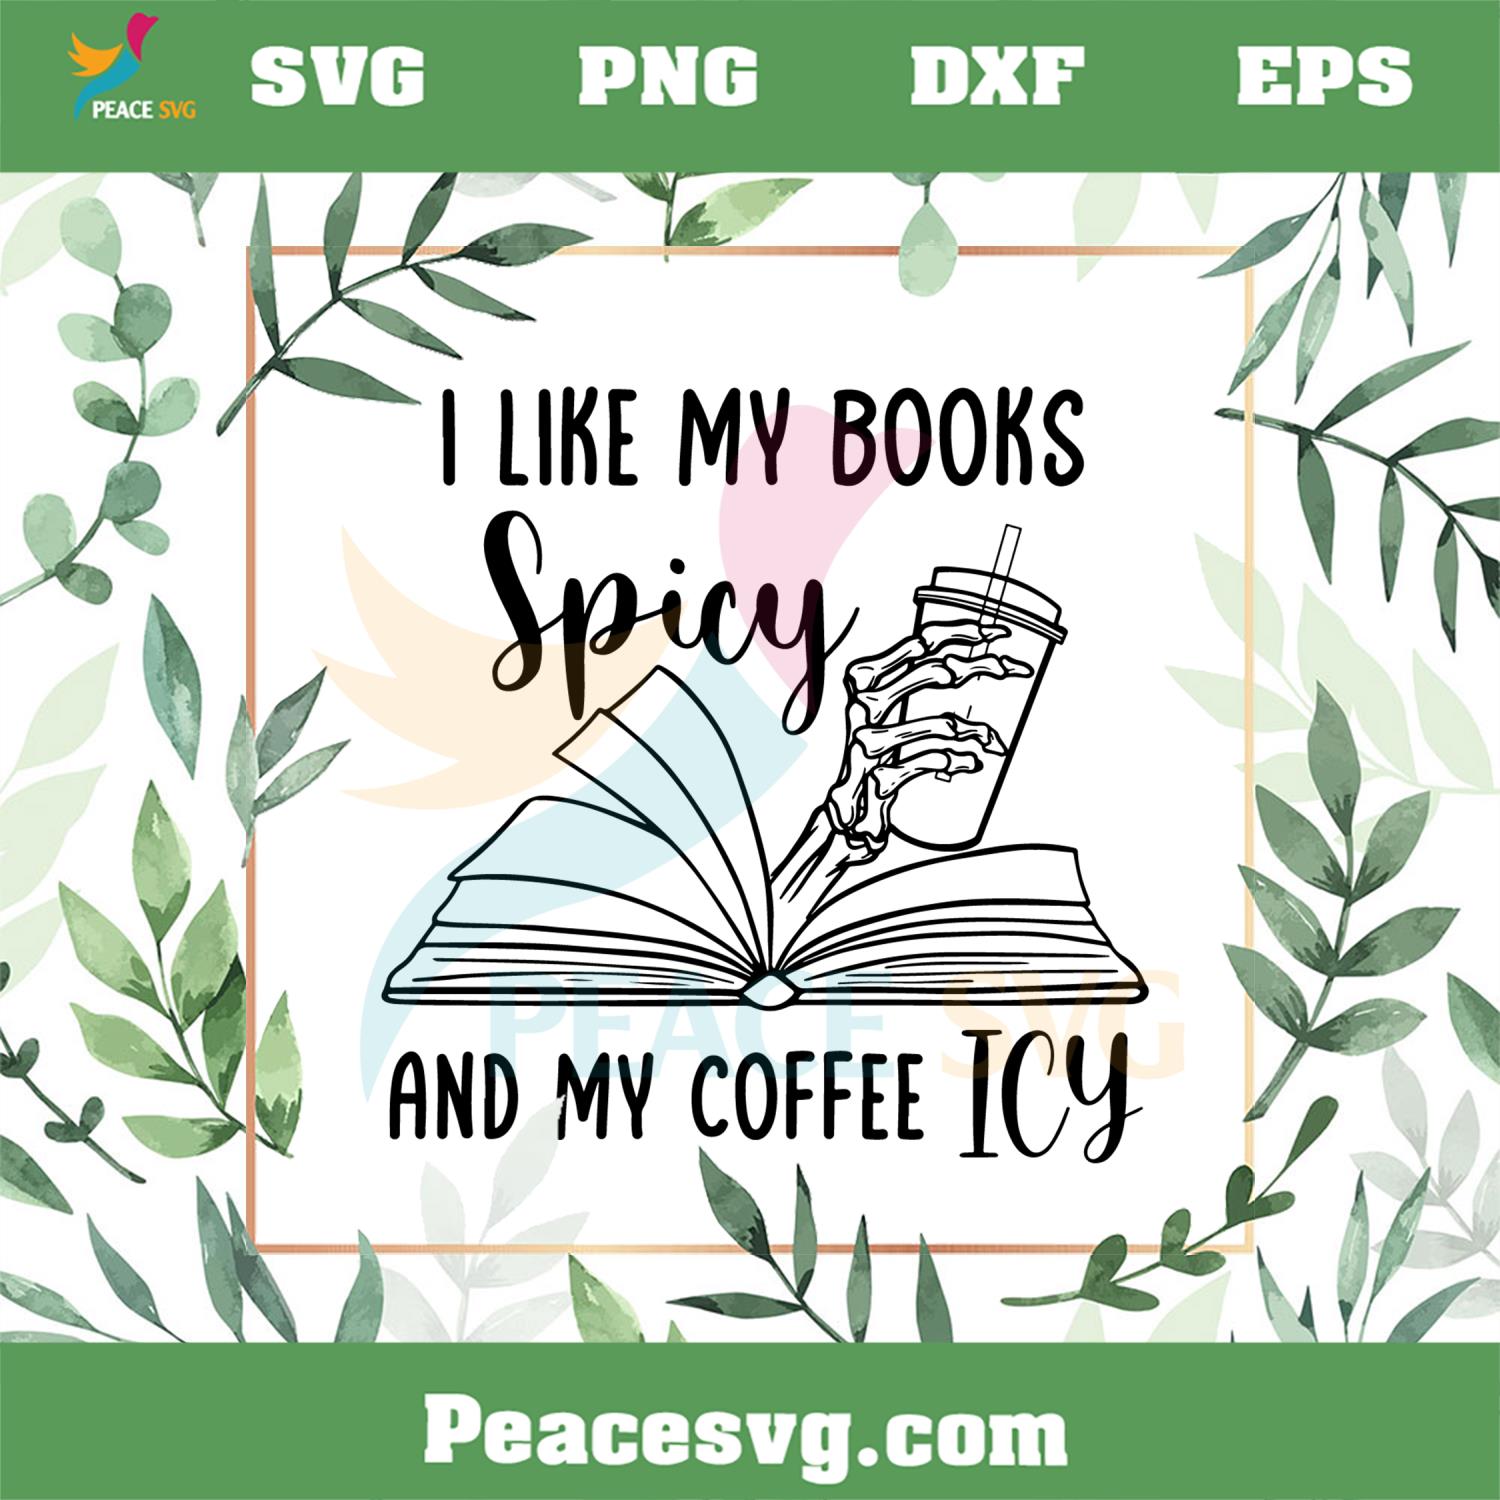 I Like My Books Spicy And My Coffee Icy SVG Funny Bookish SVG